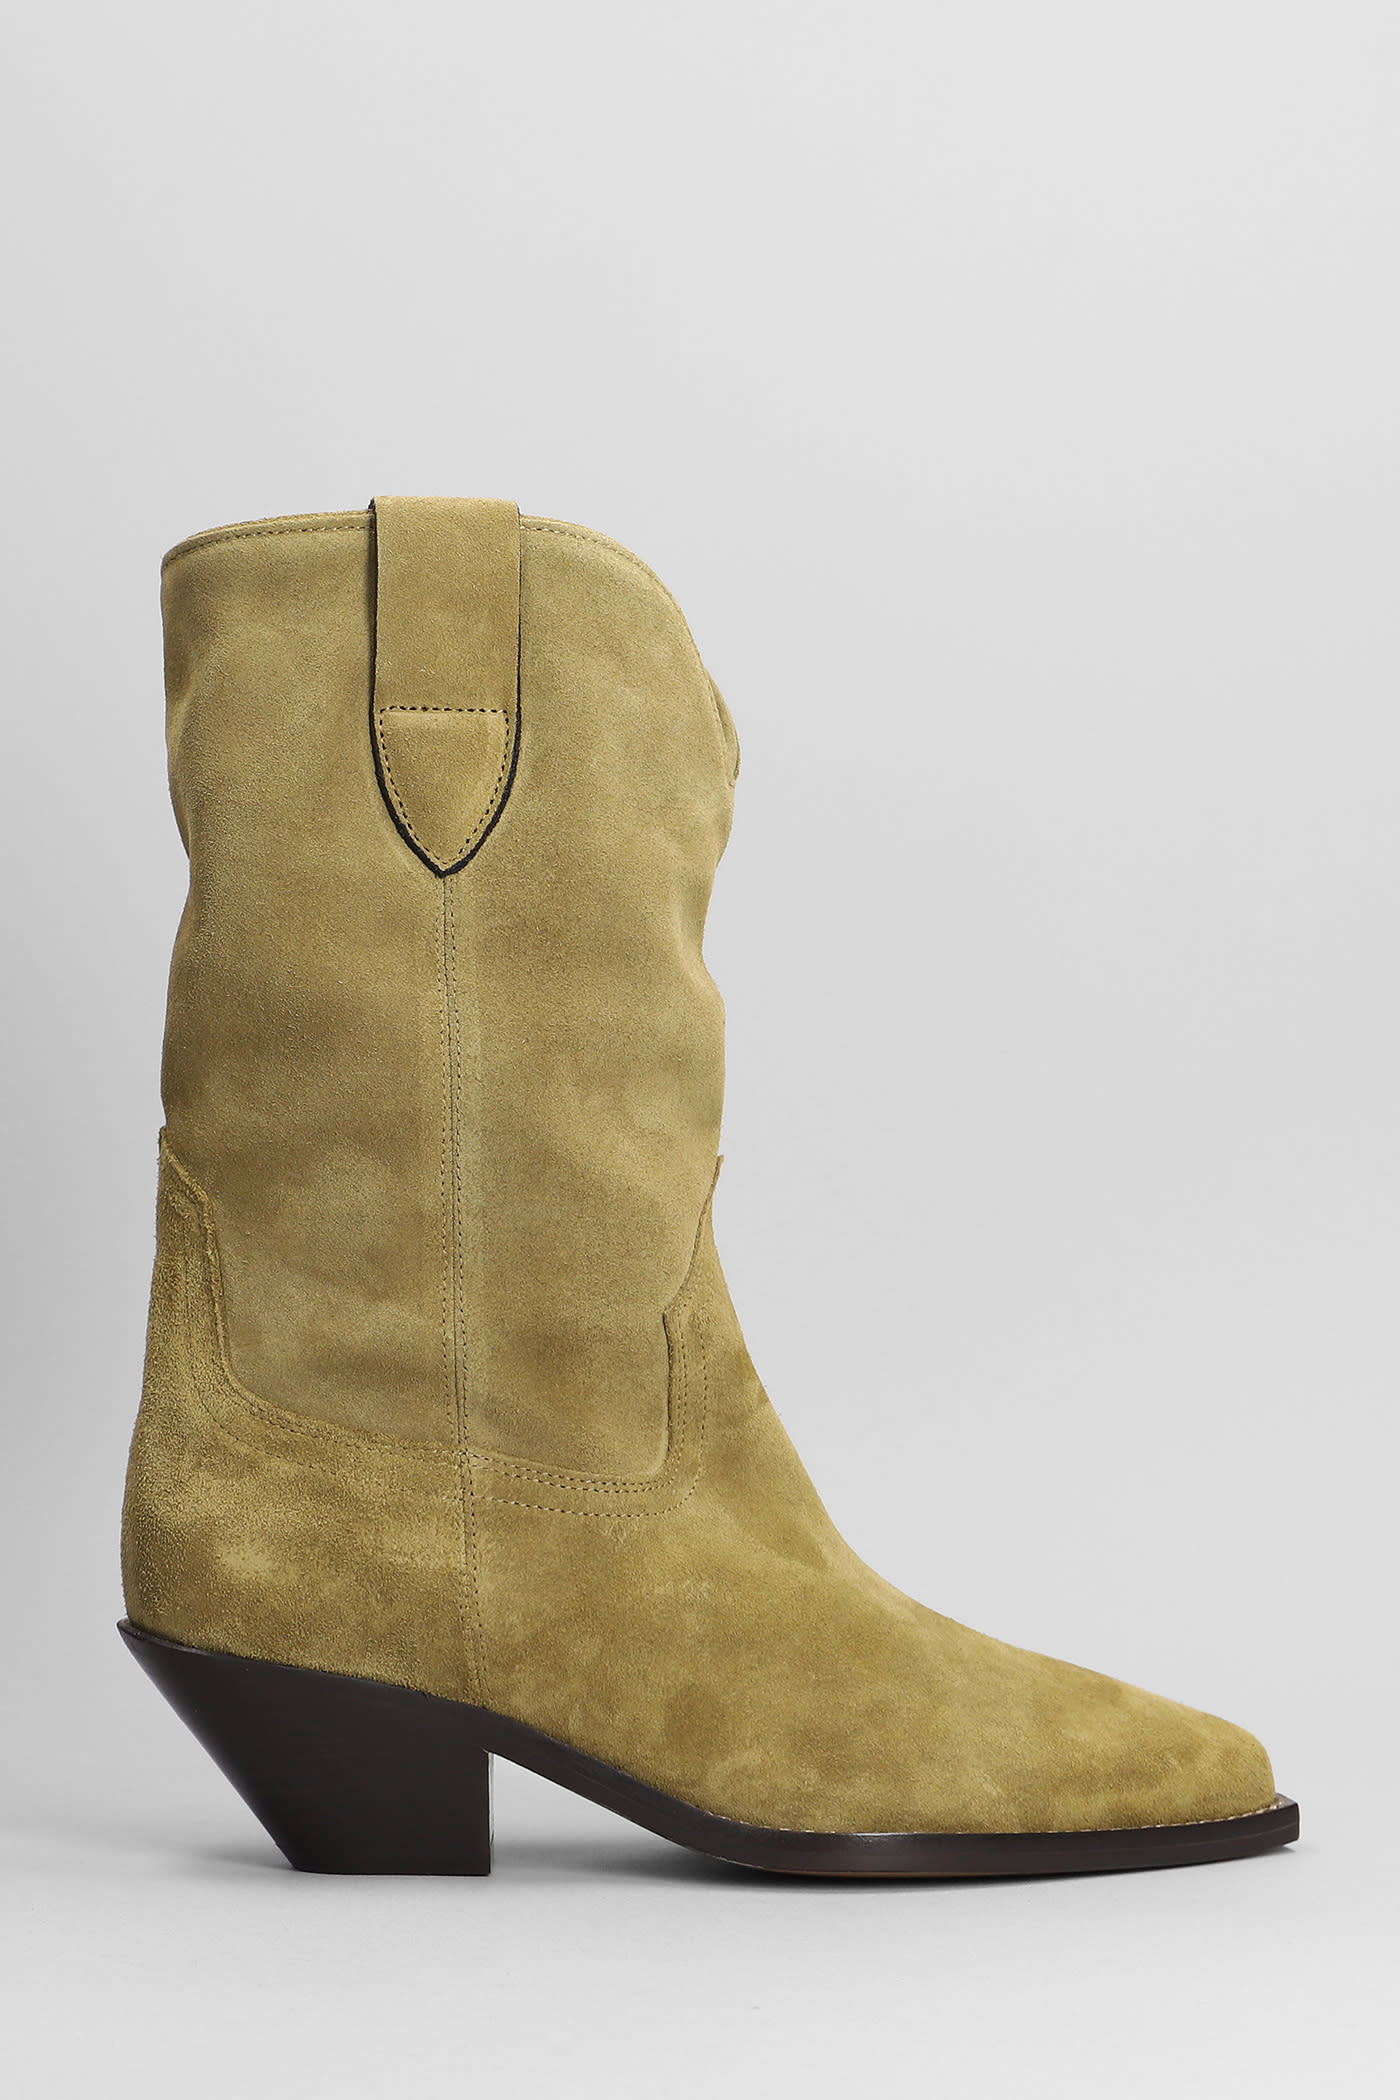 Isabel Marant Dahope Texan Ankle Boots In Taupe Suede